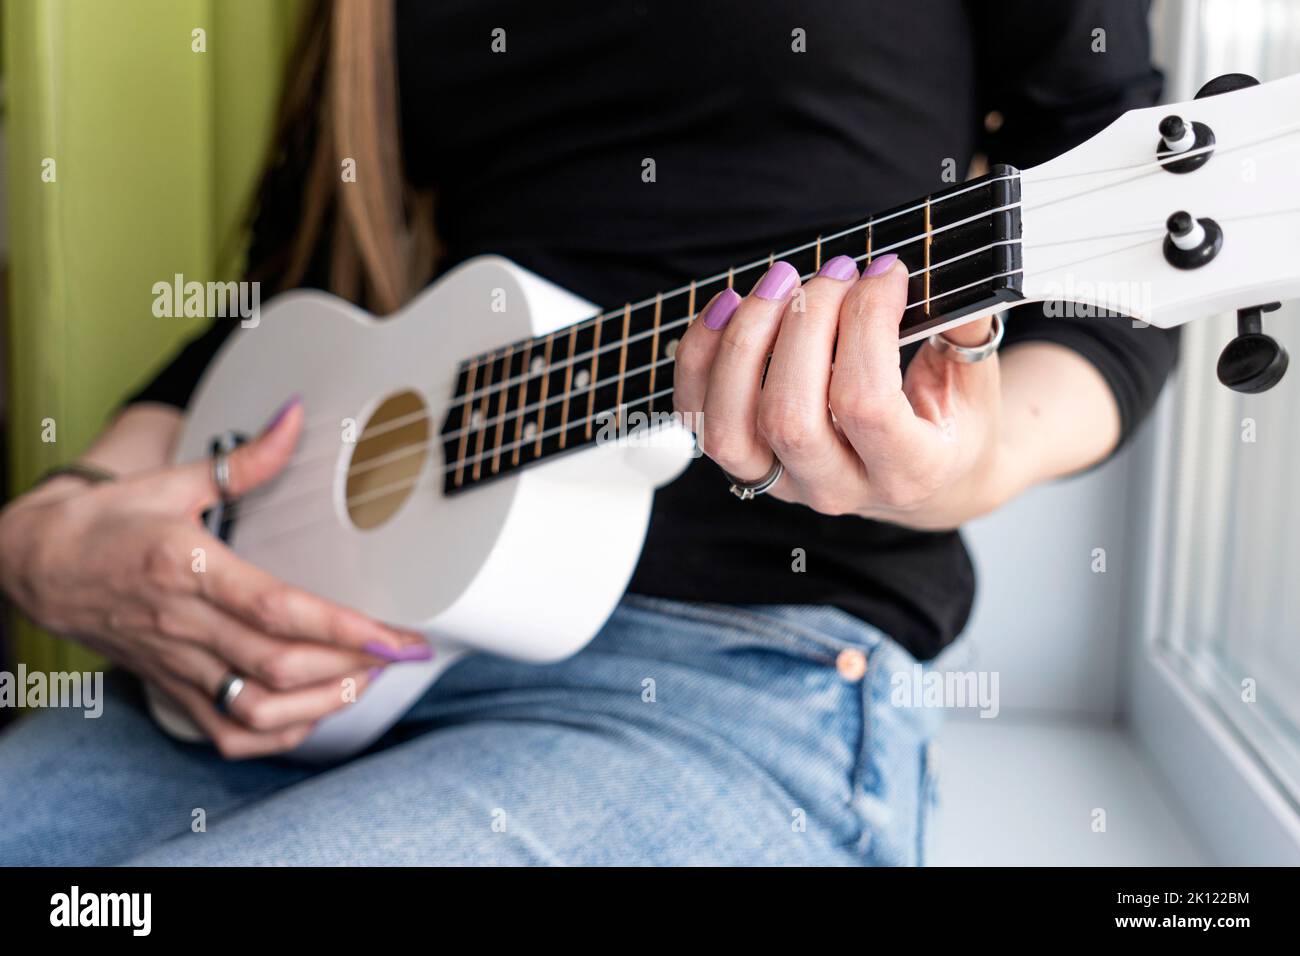 Girl sitting at home learns to play ukulele using online lessons. Stock Photo